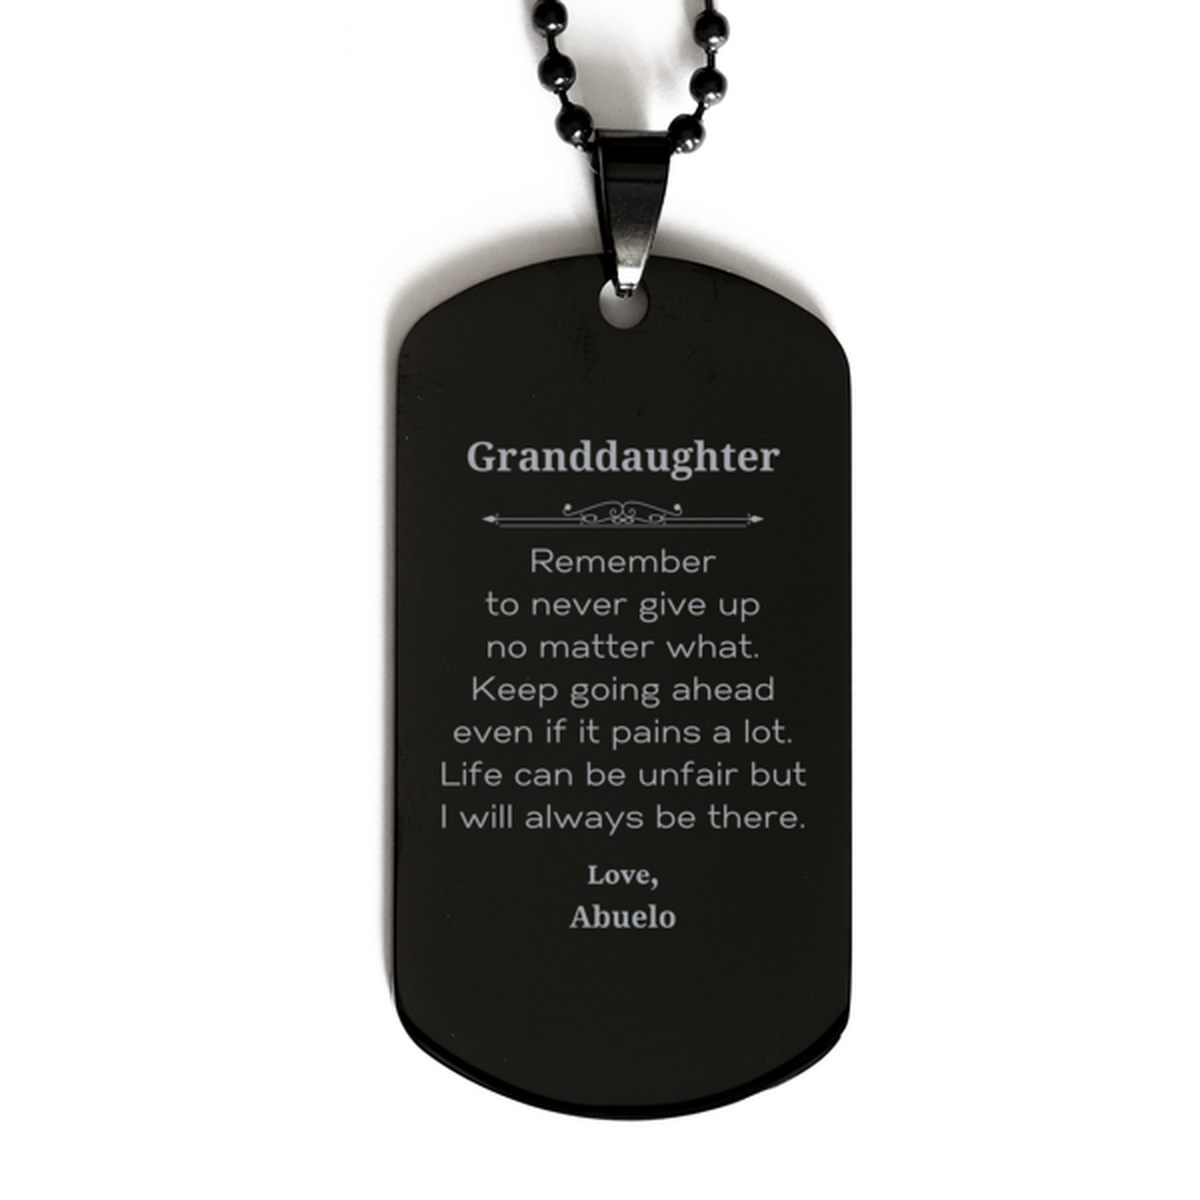 Granddaughter Motivational Gifts from Abuelo, Remember to never give up no matter what, Inspirational Birthday Black Dog Tag for Granddaughter